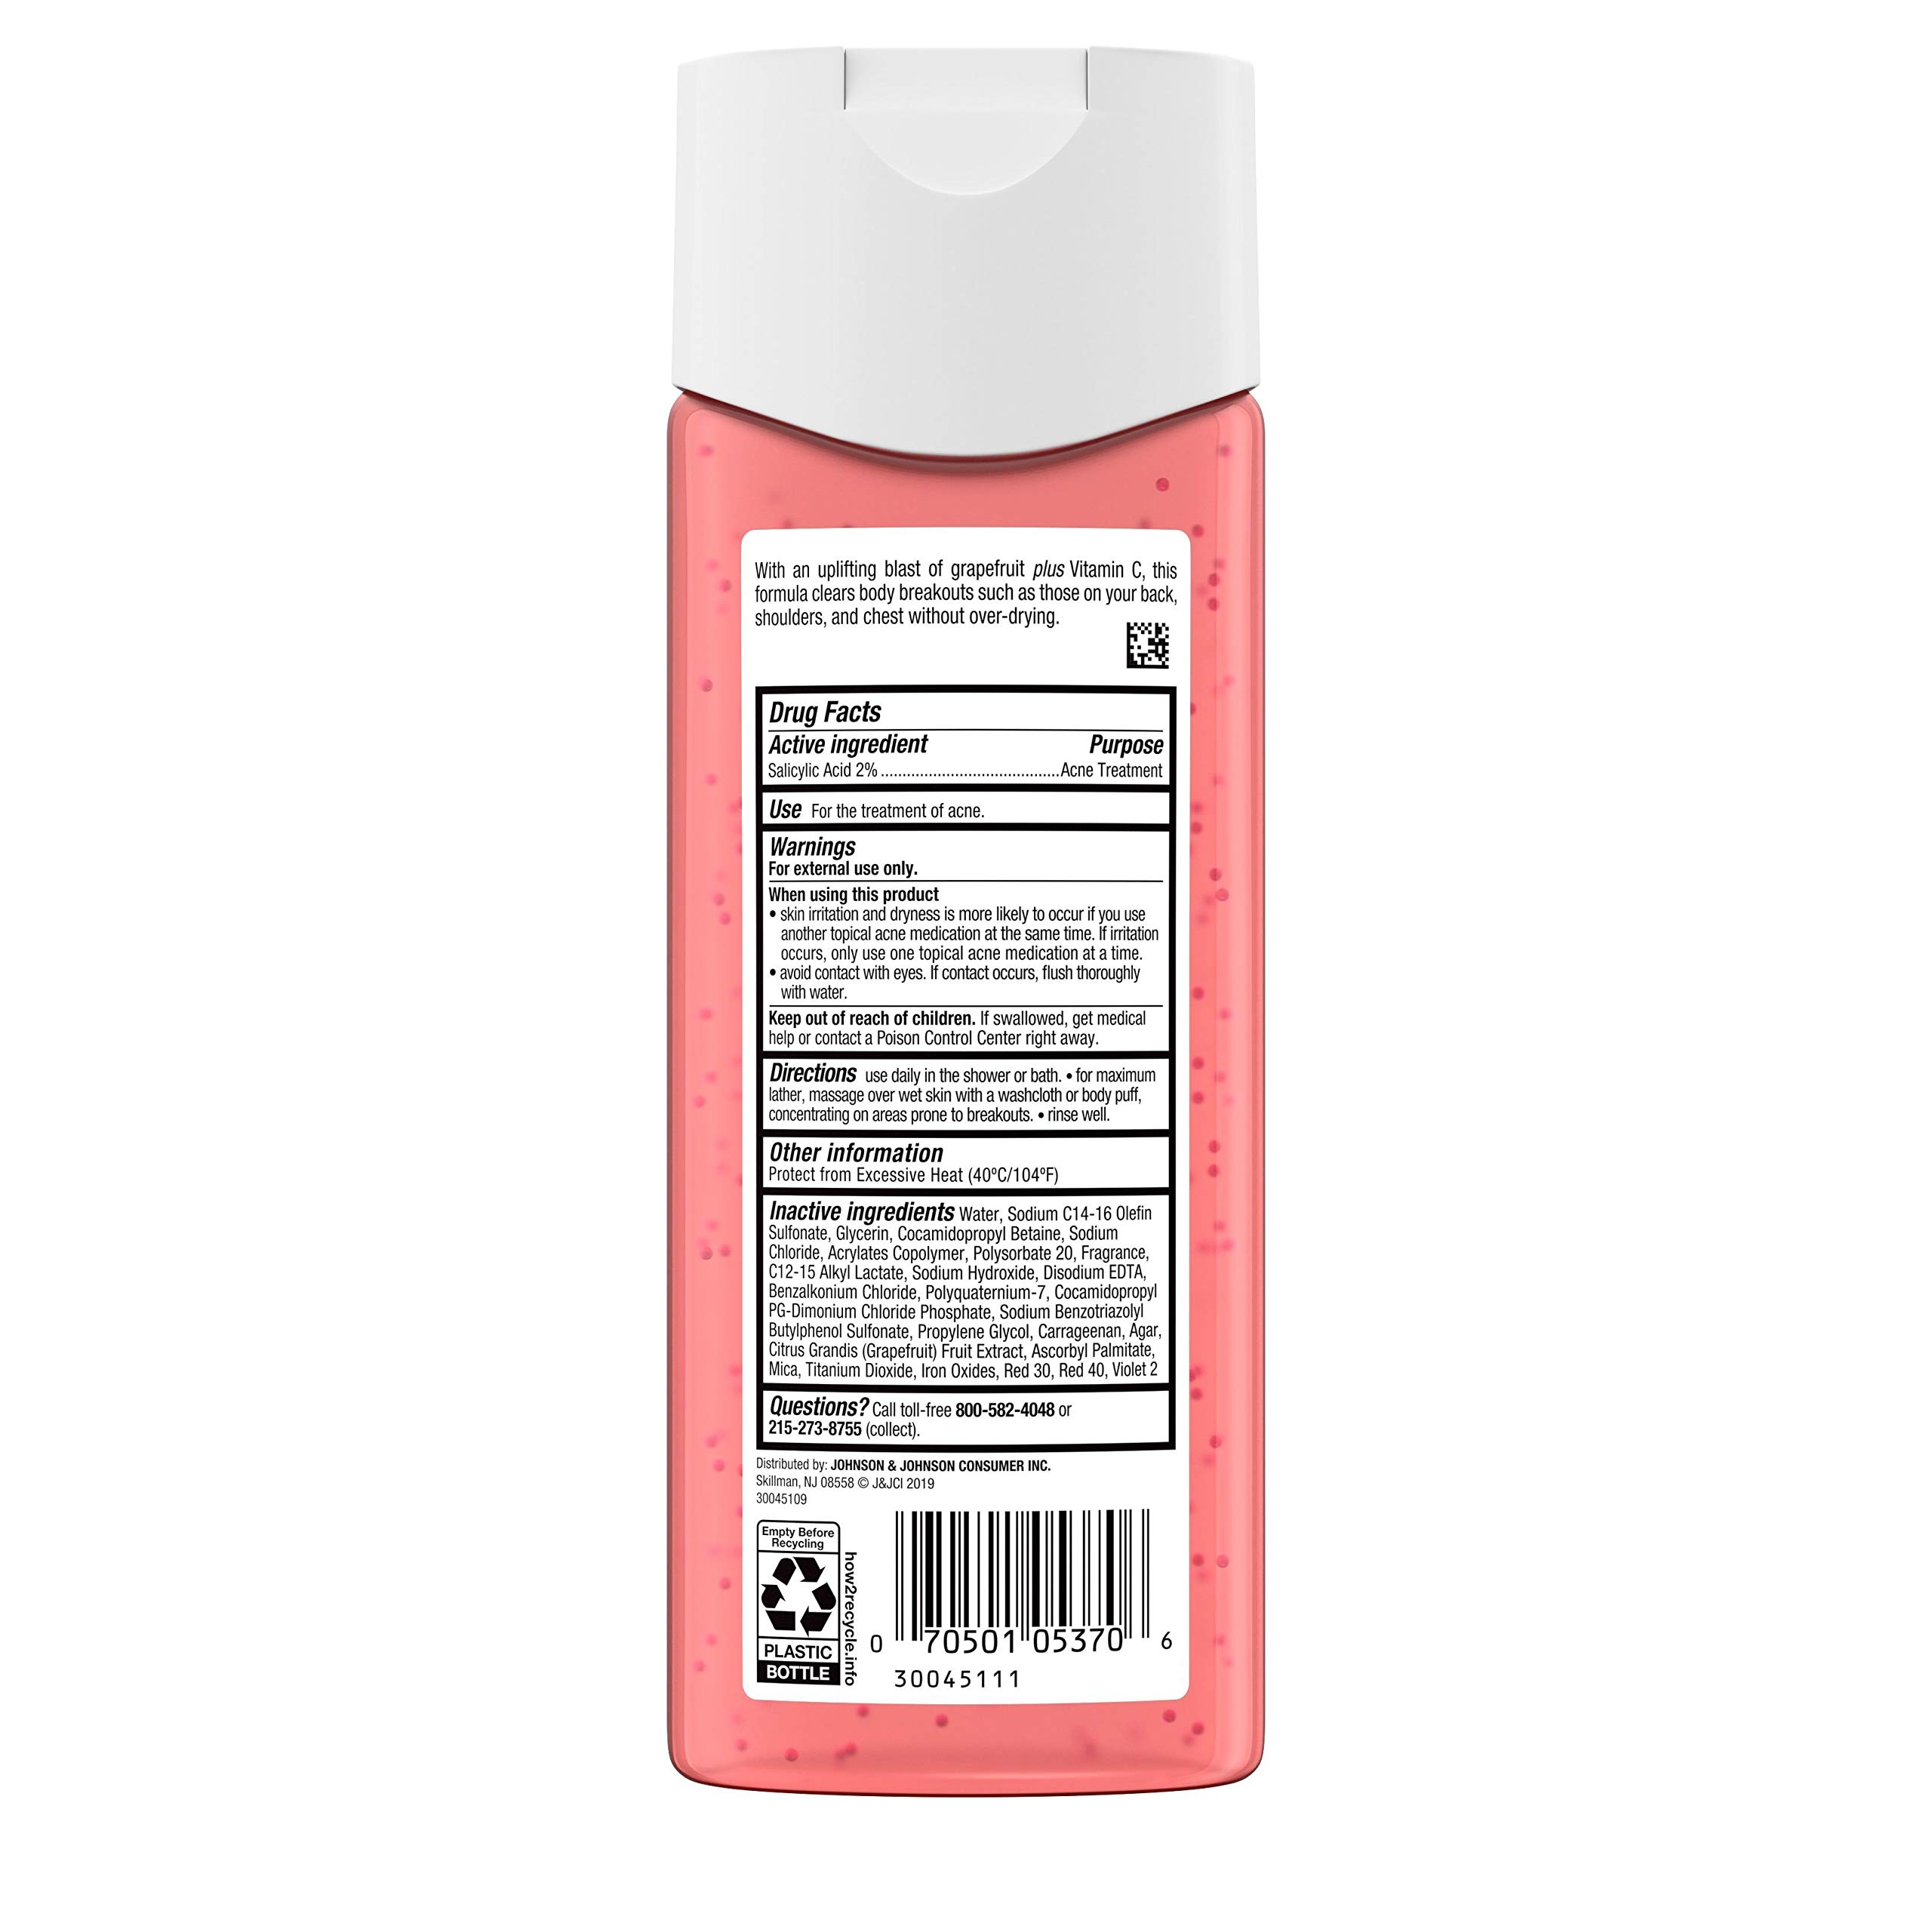 Neutrogena Body Clear Acne Treatment Body Wash with Salicylic Acid Acne Medicine, Pink Grapefruit Body Acne Cleanser to Prevent Breakouts on Back, Chest & Shoulders, 3 x 8.5 fl. oz